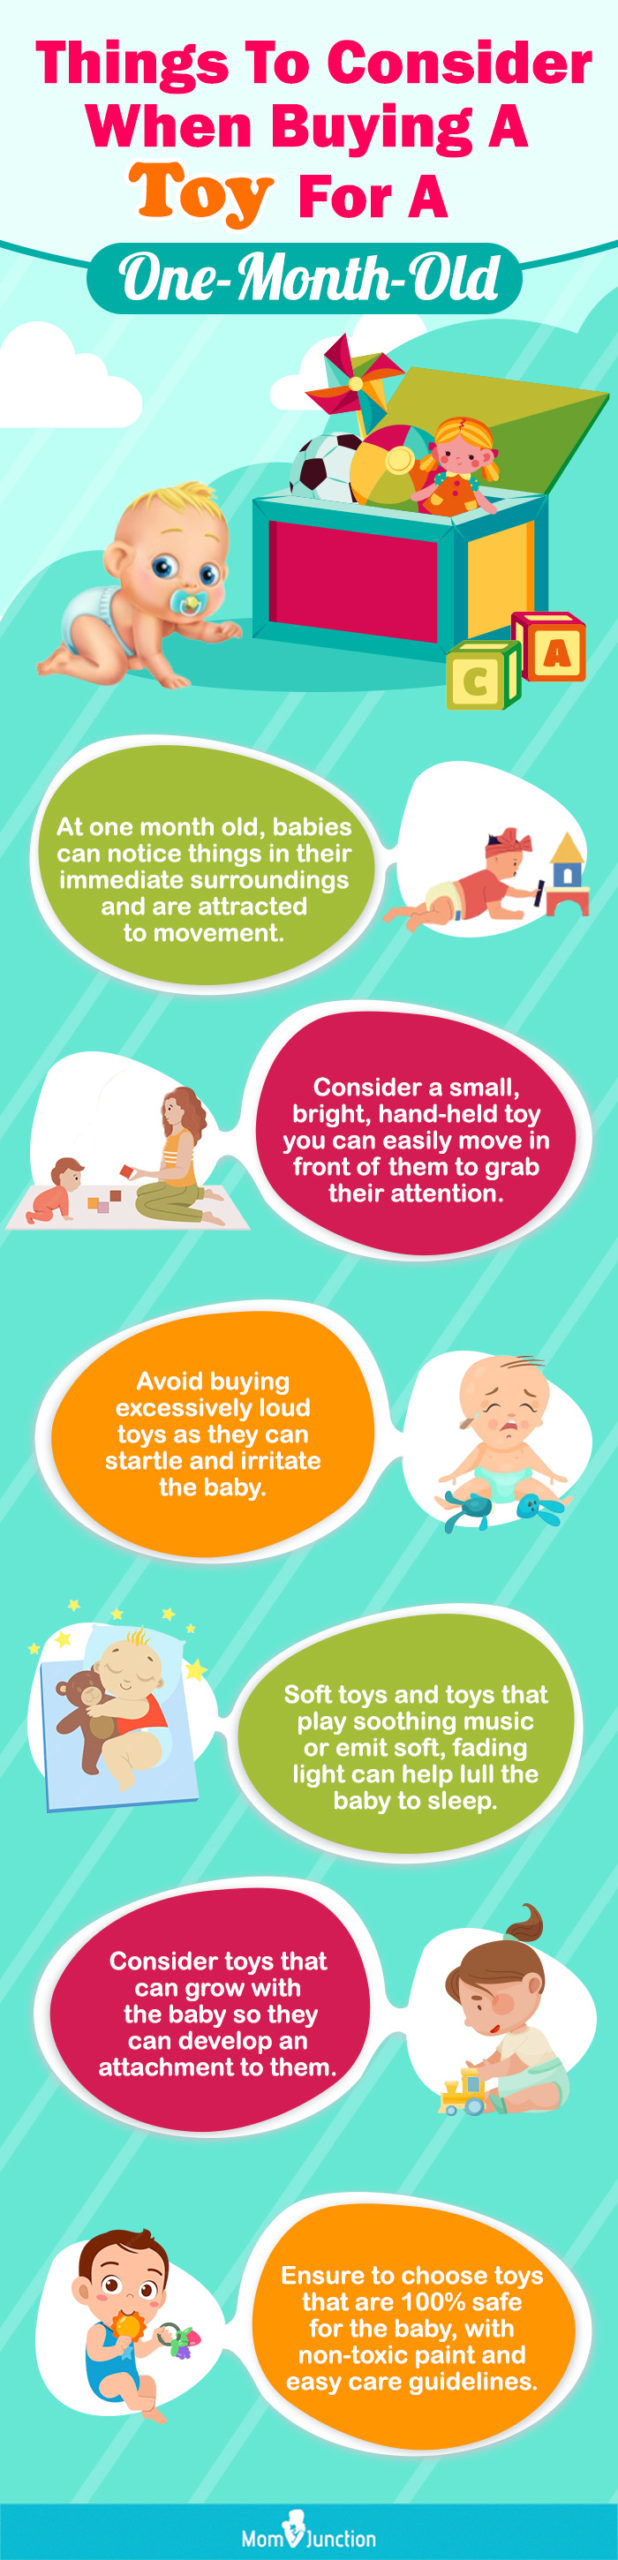 Things To Consider When Buying A Toy For A One-Month-Old